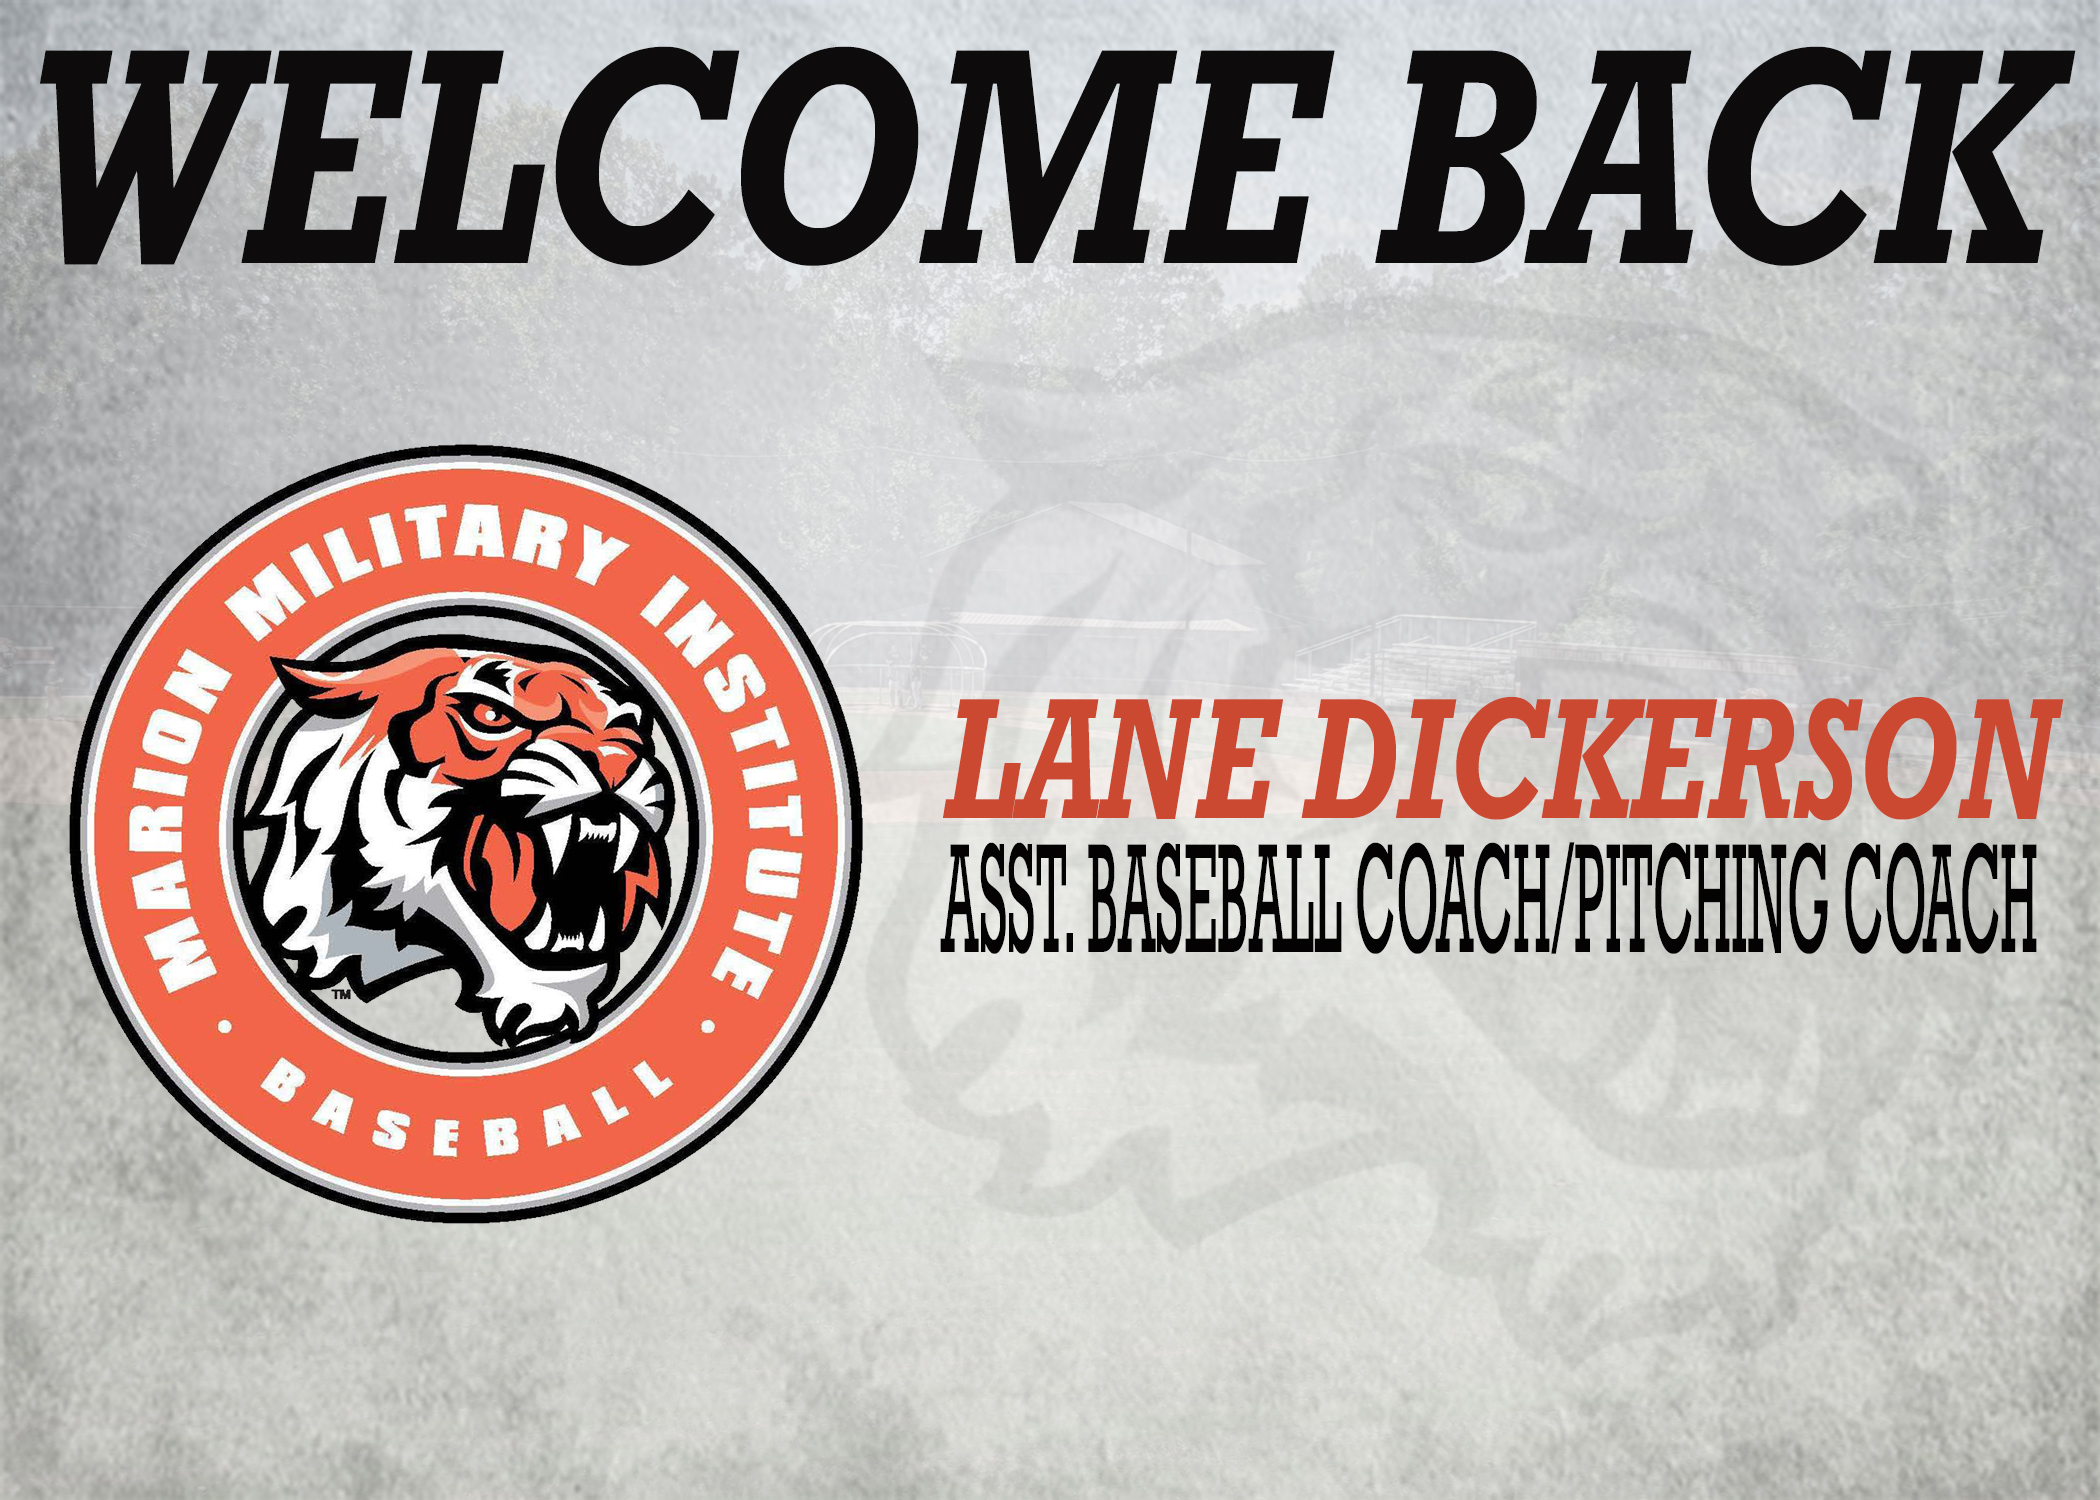 Lane Dickerson Named Assistant Basbeall Coach/Pitching Coach